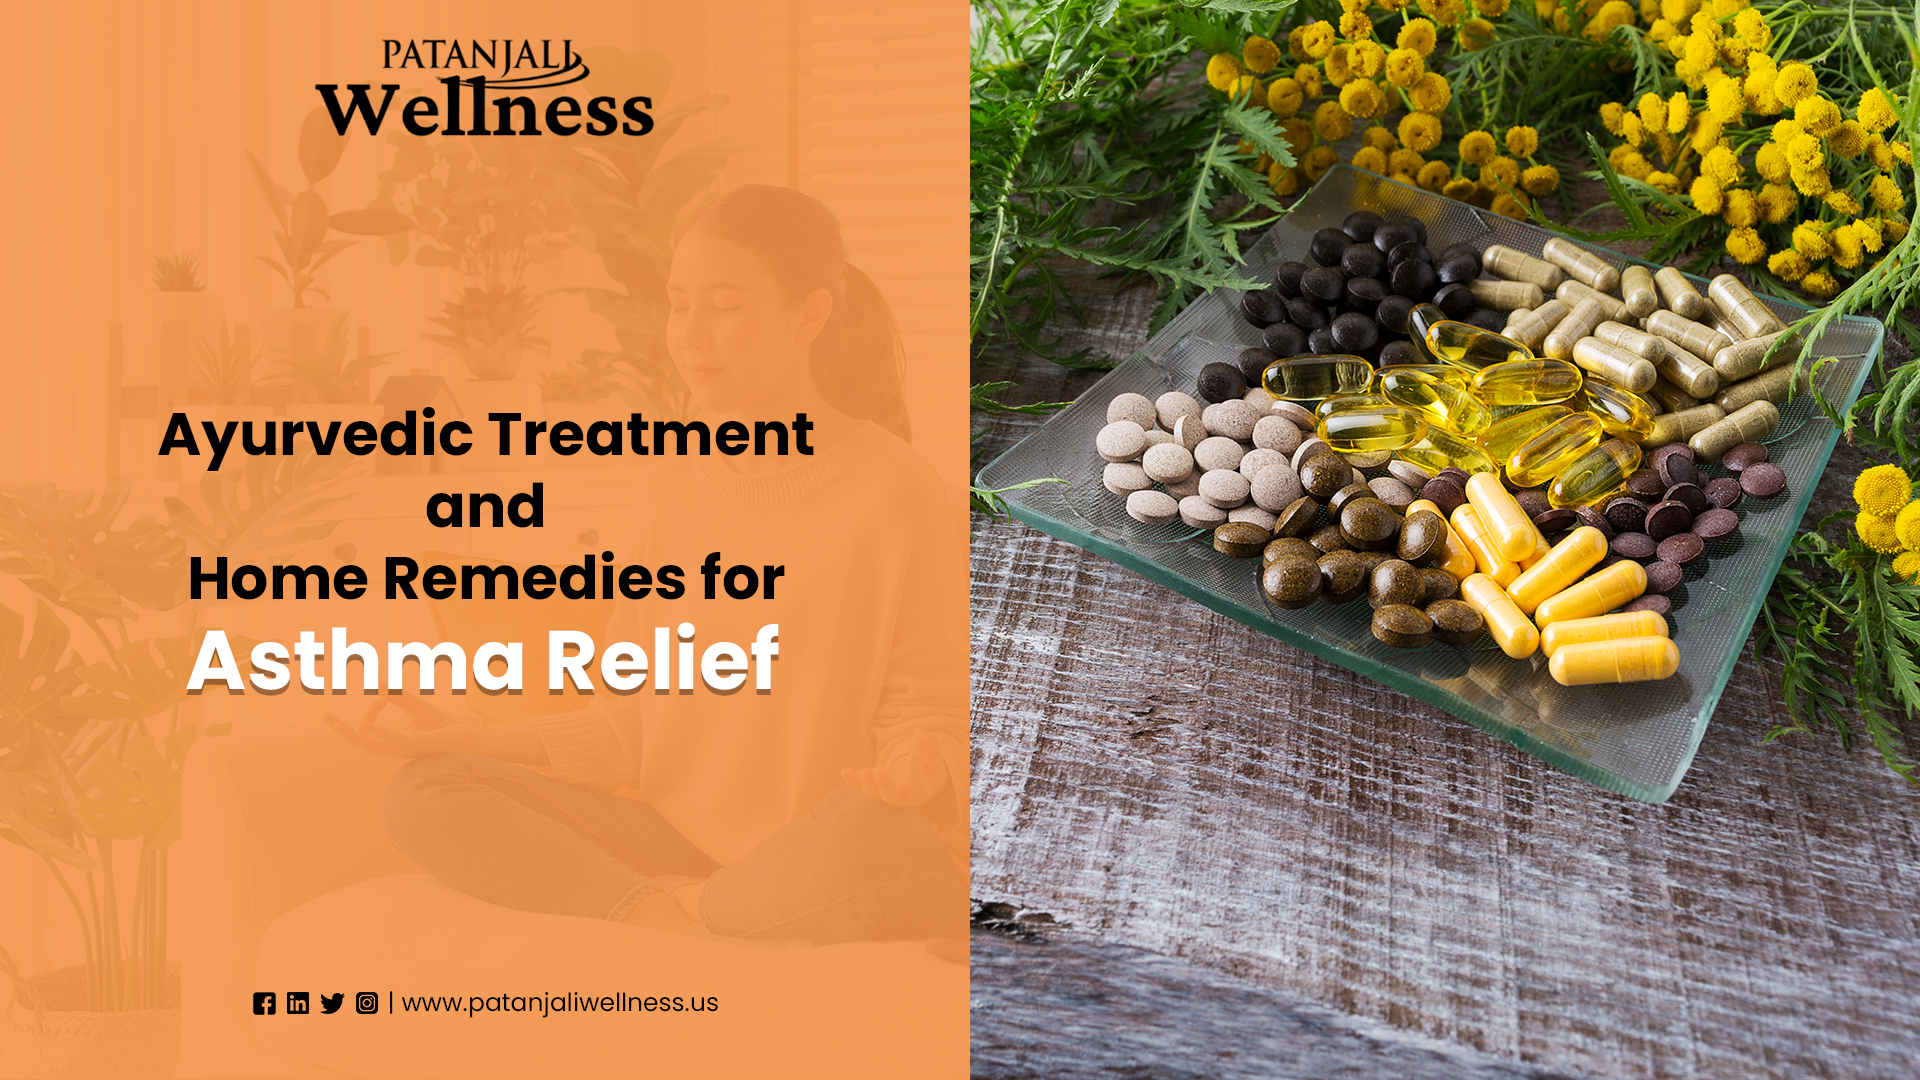 Ayurvedic Treatment and Home Remedies for Asthma Relief